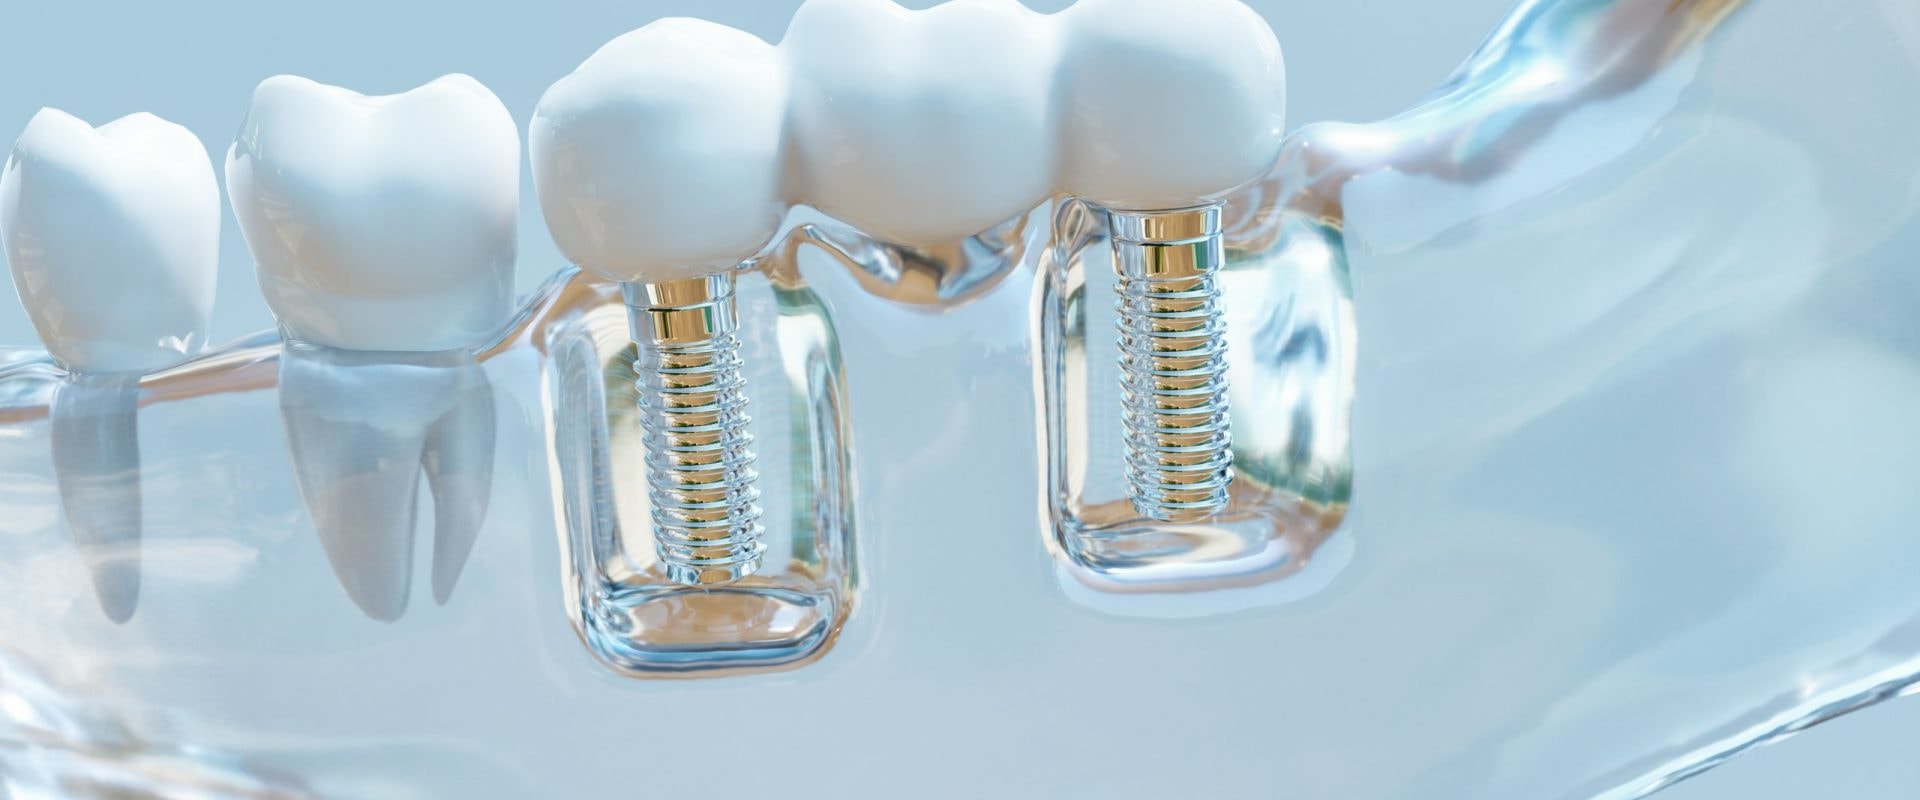 What are the most common causes of failure of dental implants?